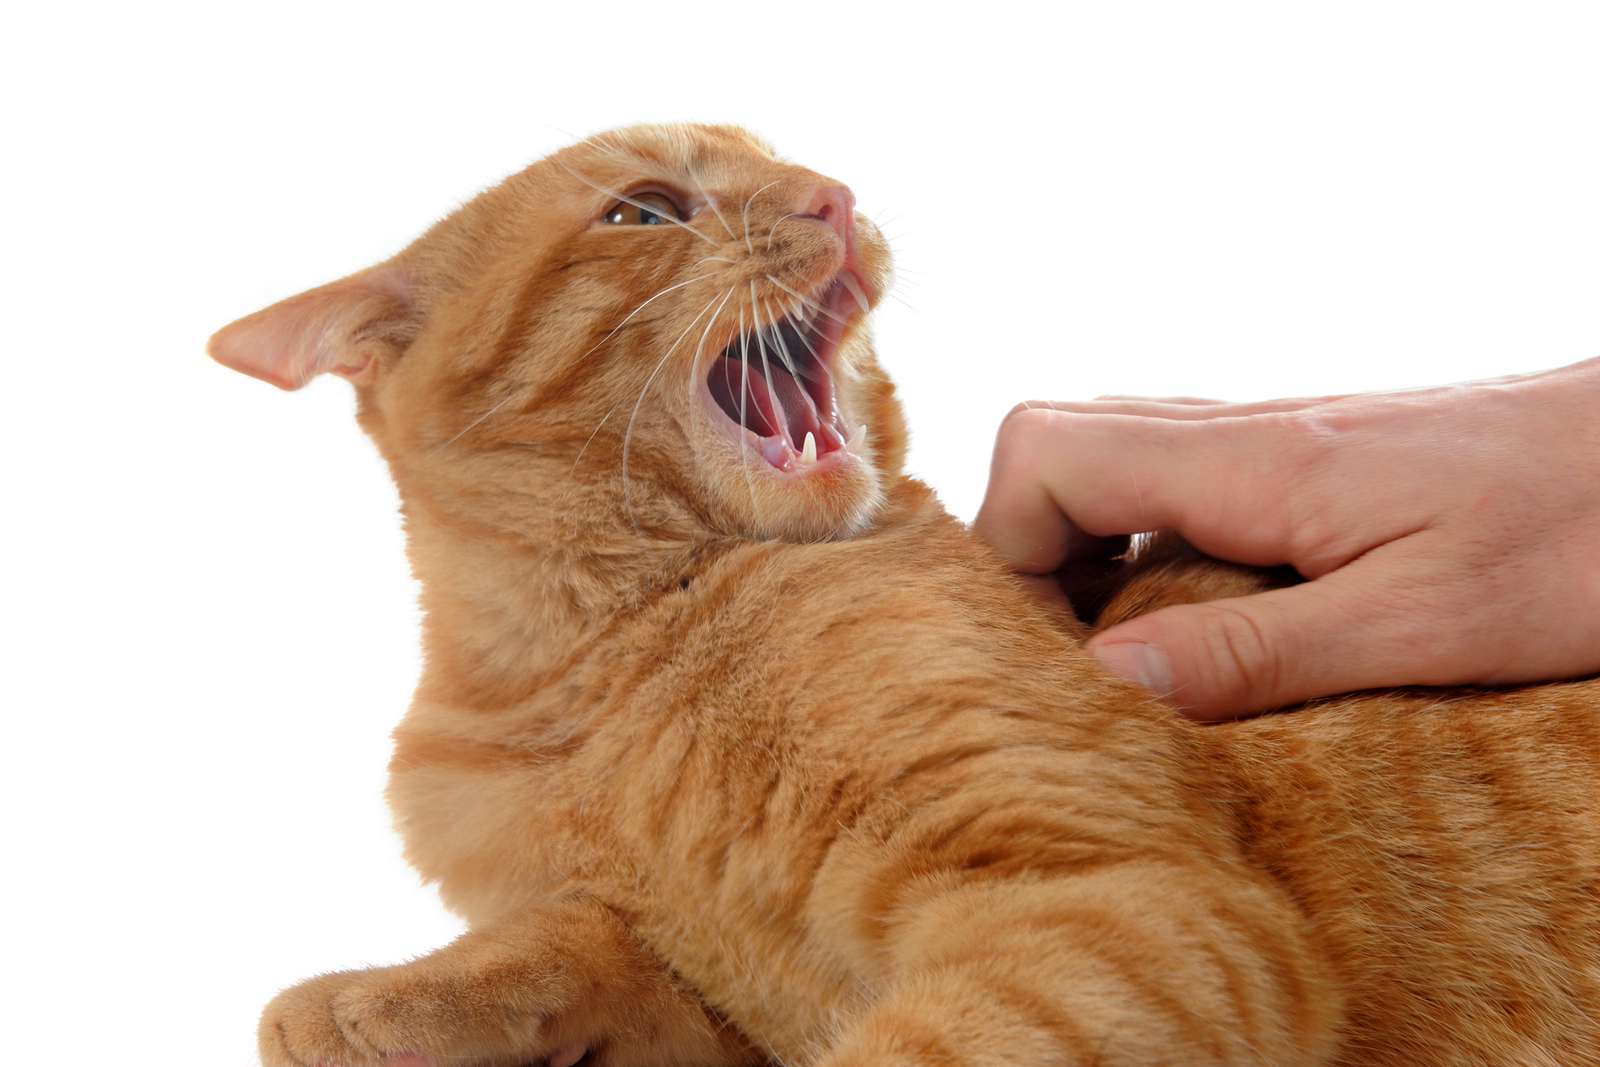 Image Description: An aggressive cat hissing and clawing